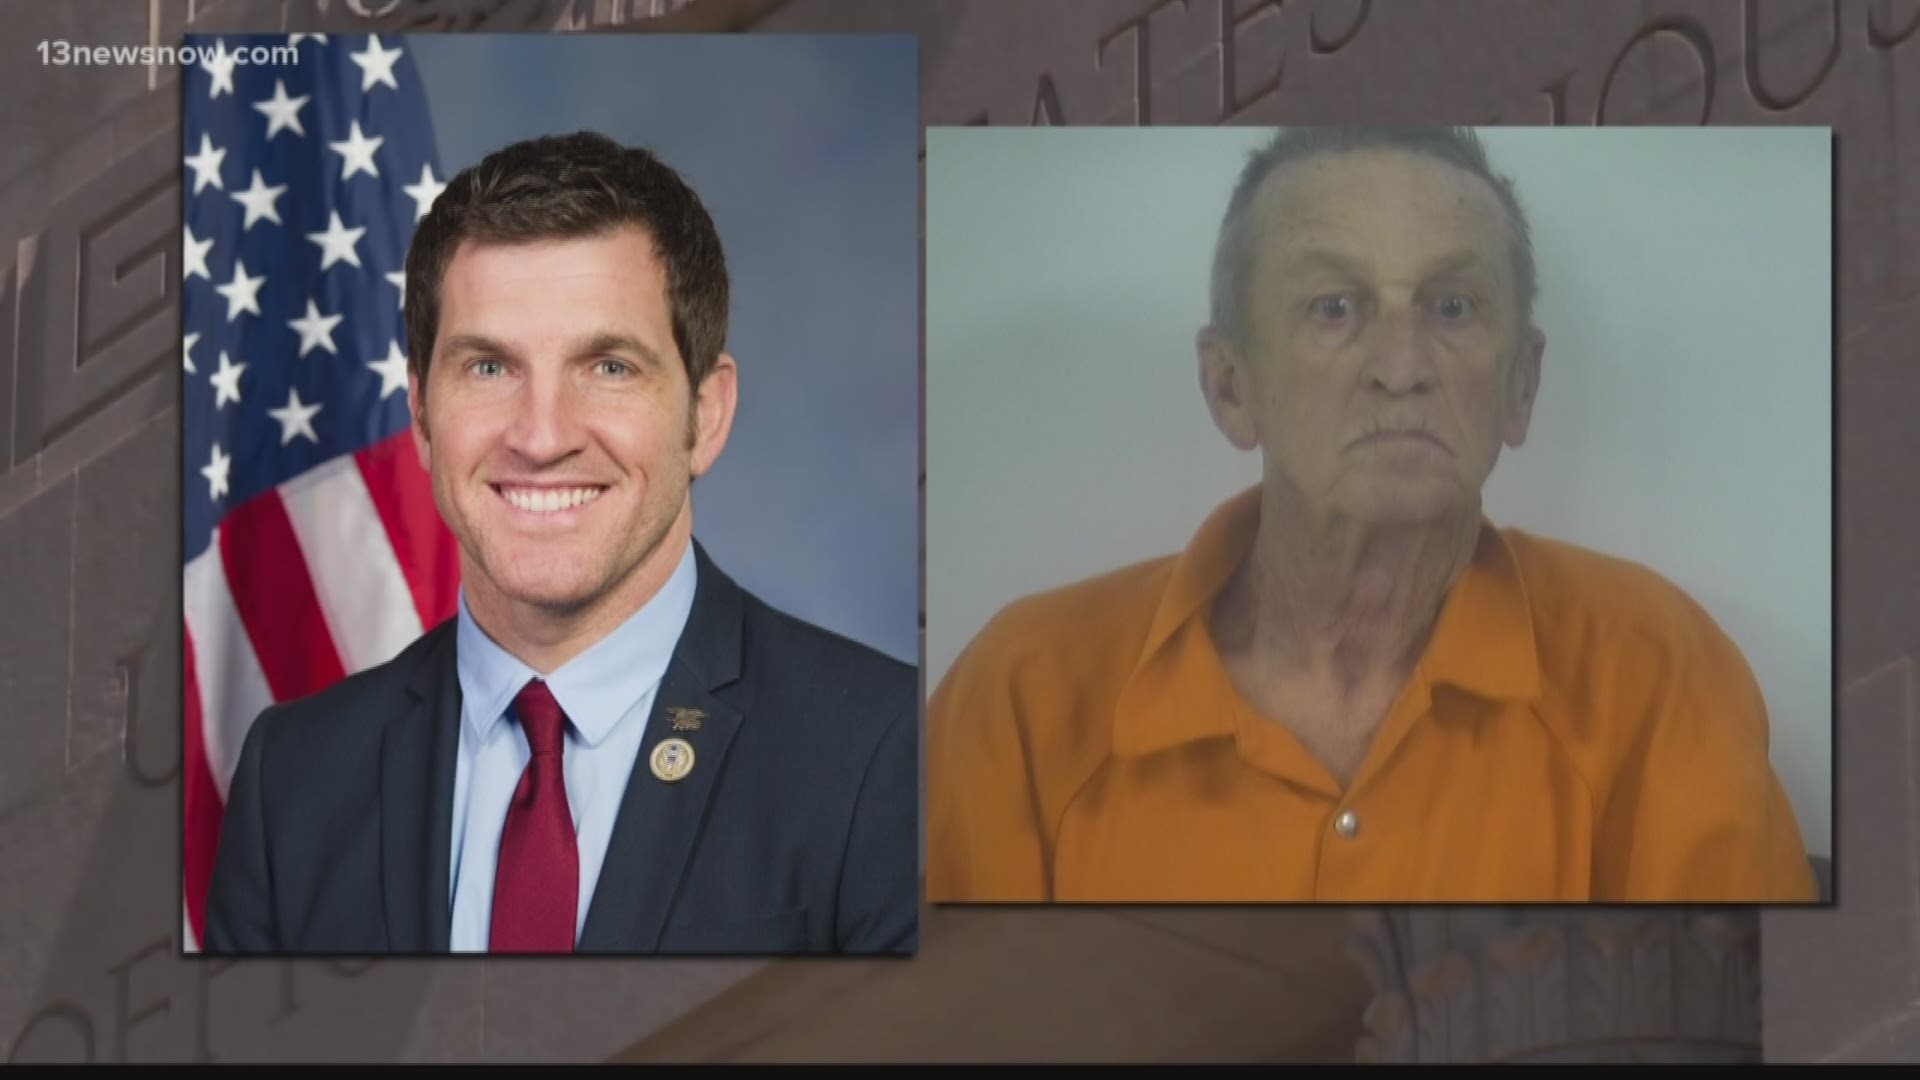 New information about the man accused of threatening to kill Congressman Scott Taylor.